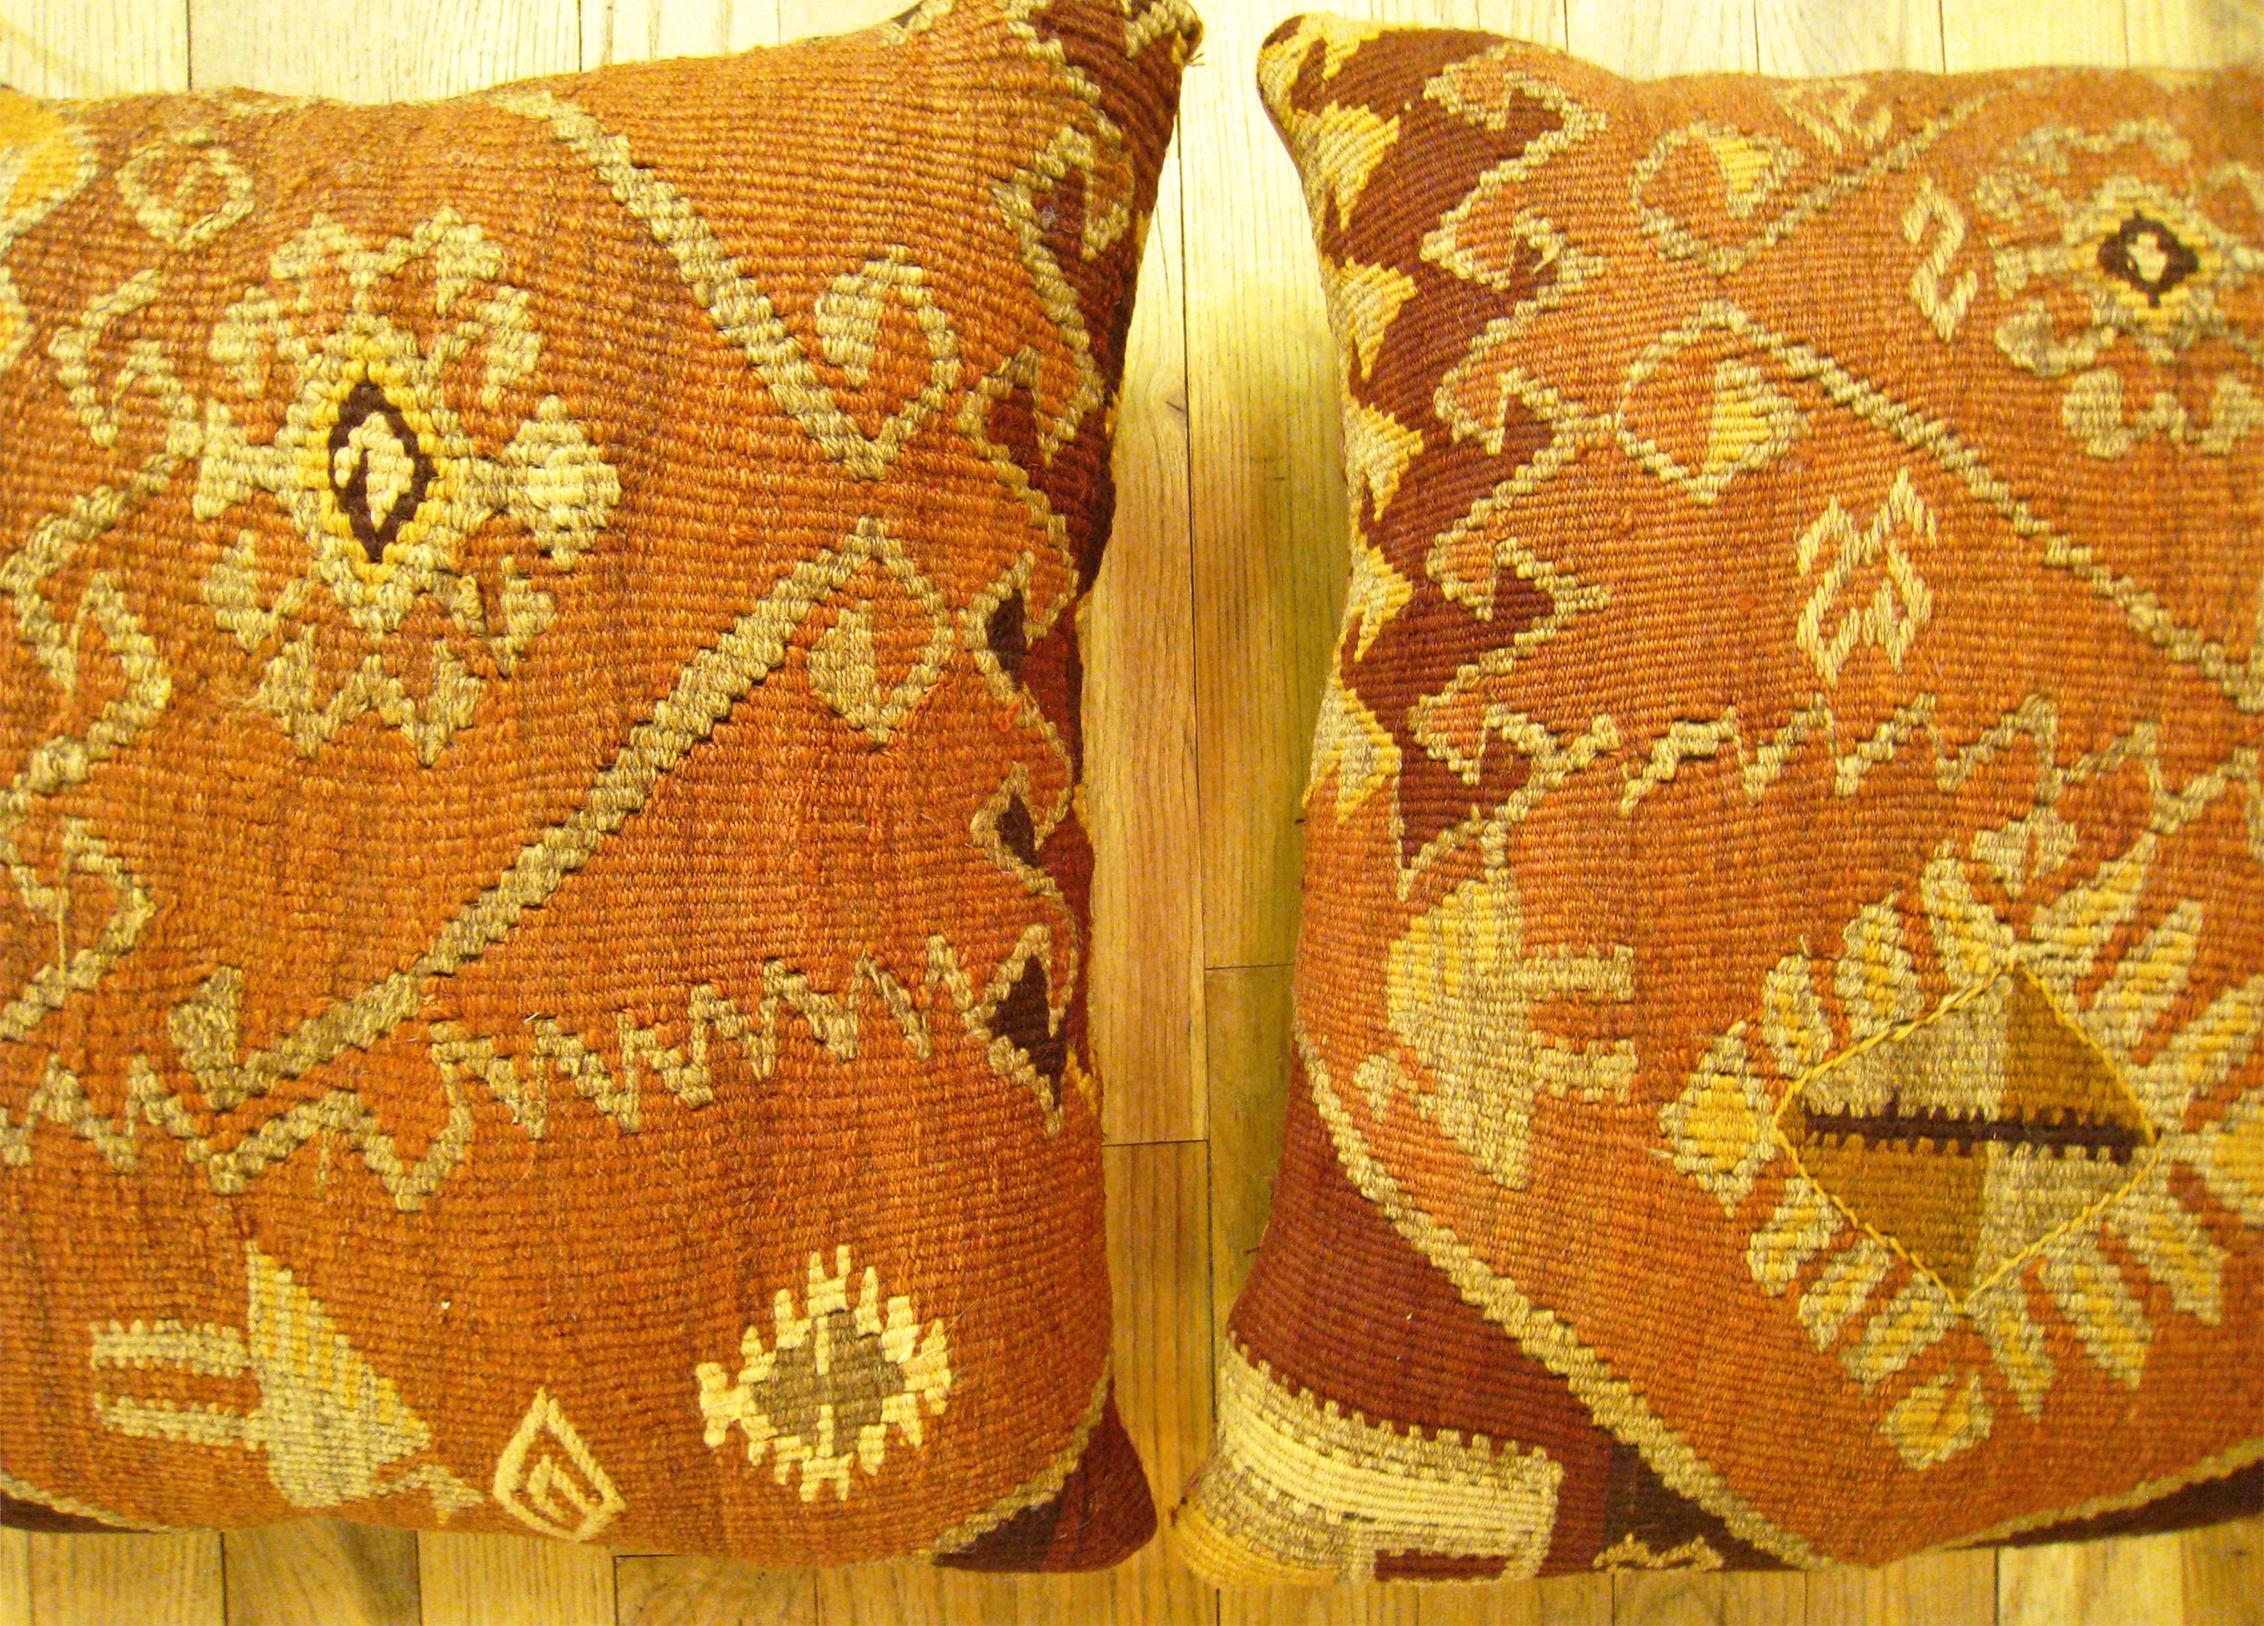 Pair of Decorative Vintage Turkish Kilim Rug Pillows with Geometric Abstracts In Good Condition For Sale In New York, NY